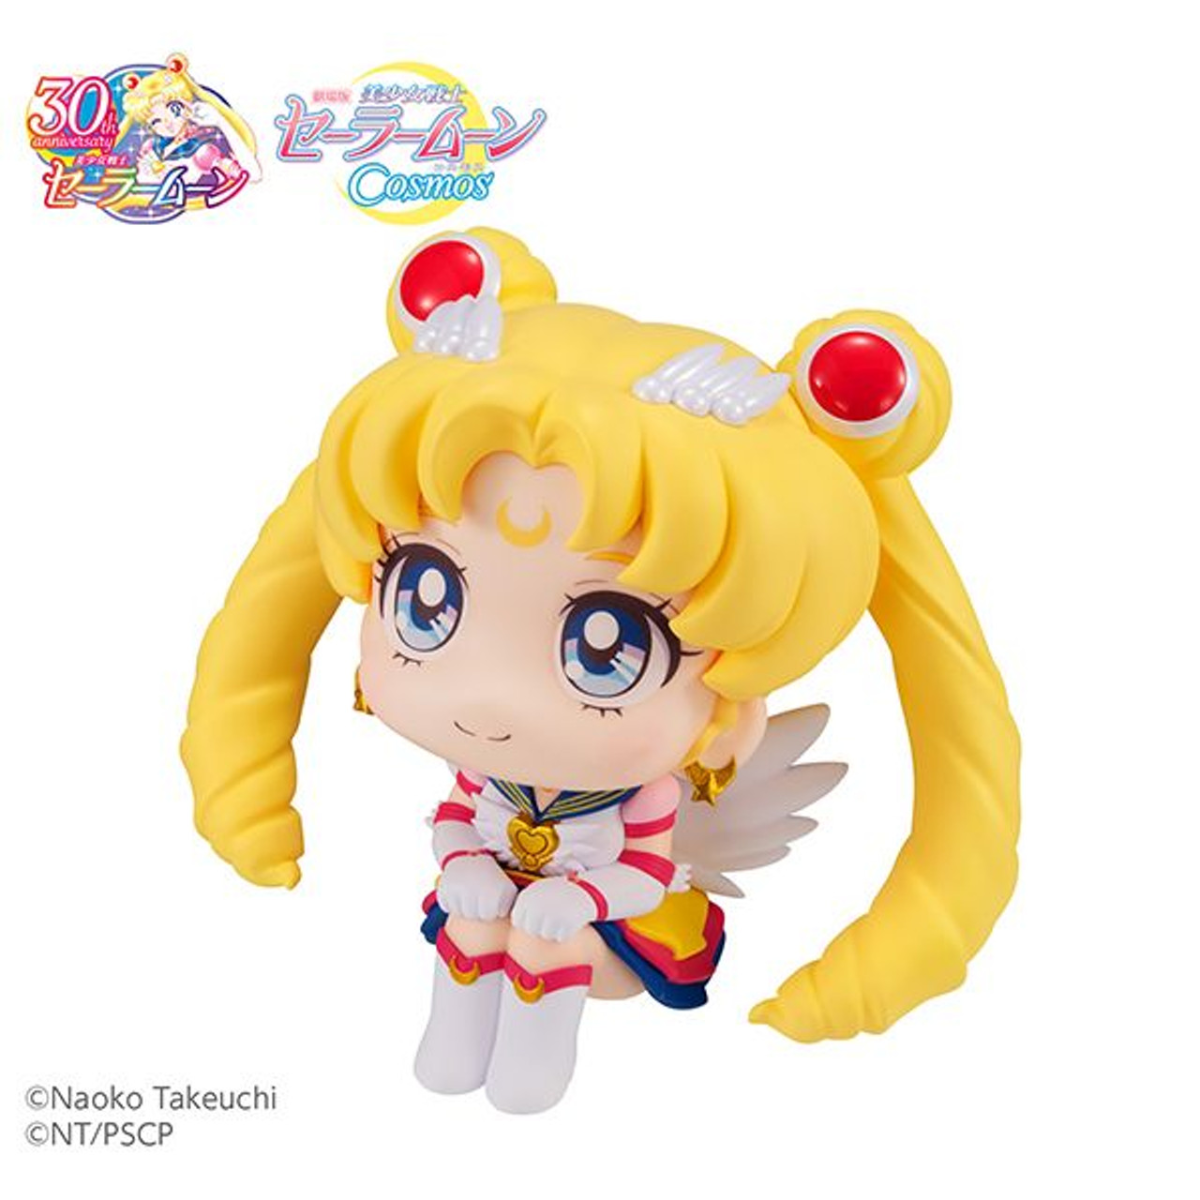 Look Up Series "Eternal Sailor Moon" (Sailor Moon Cosmos The Movie Ver.)-MegaHouse-Ace Cards & Collectibles